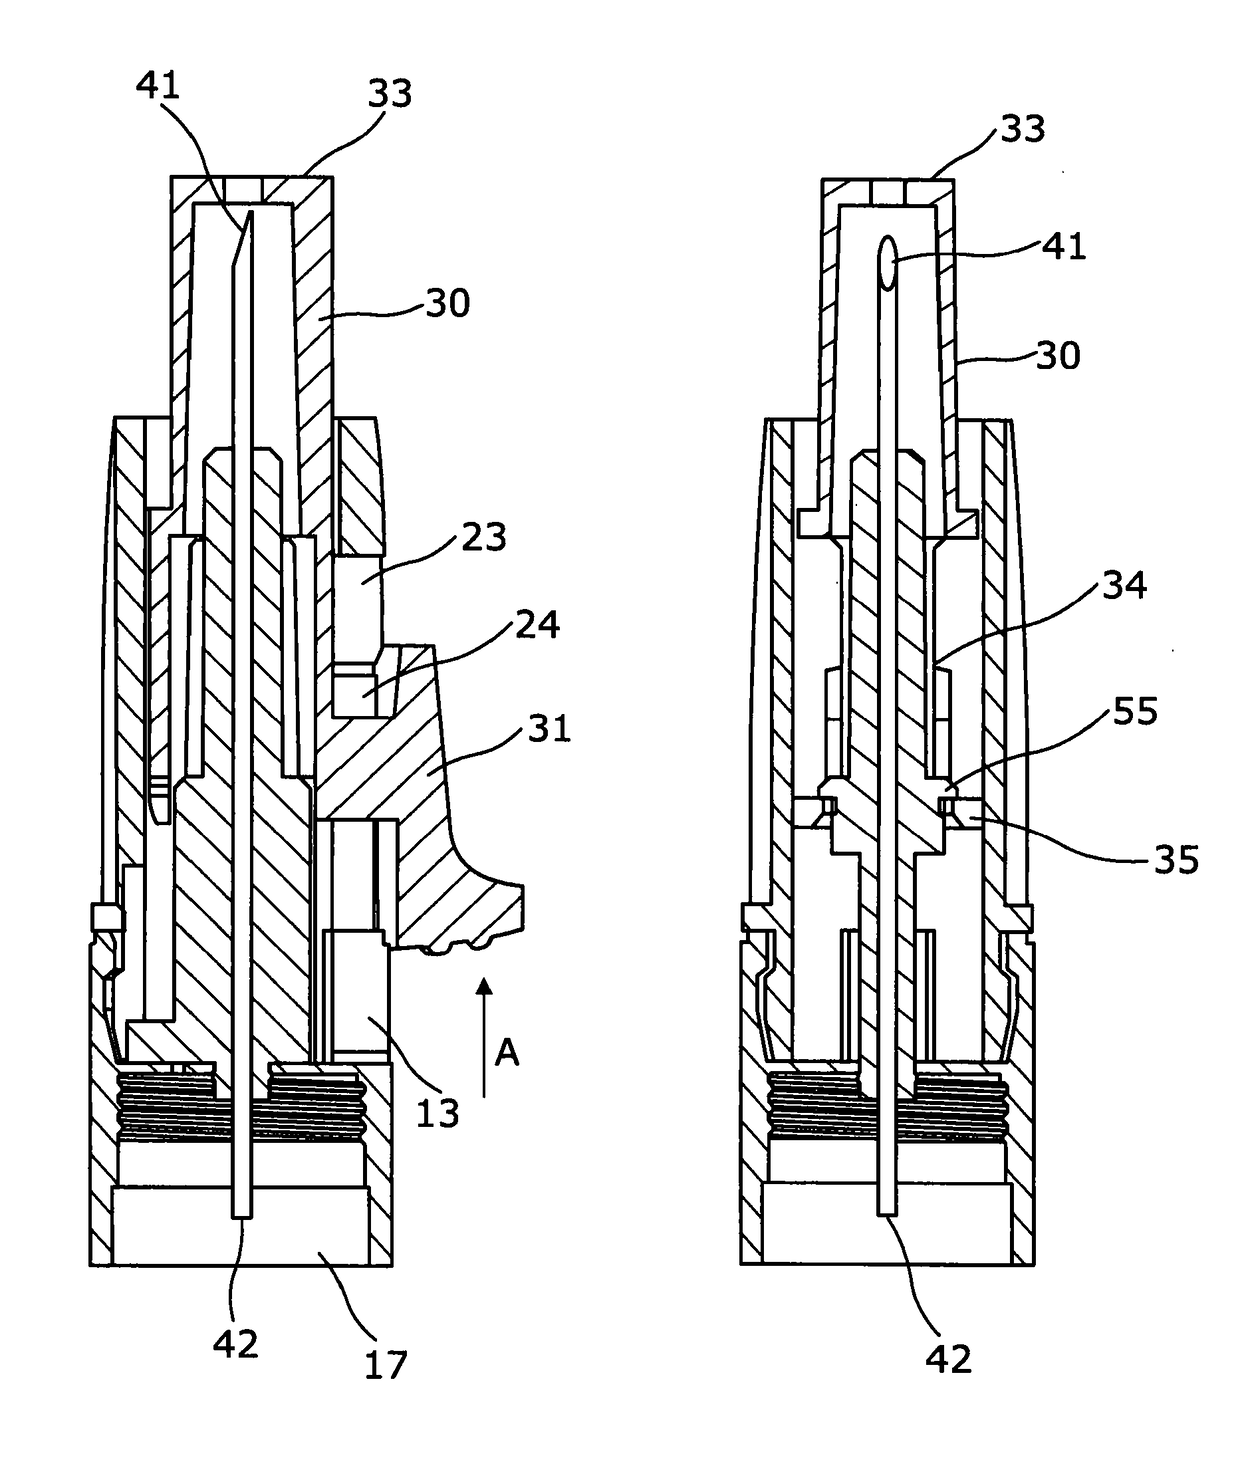 Needle assembly with needle shroud and movable needle support